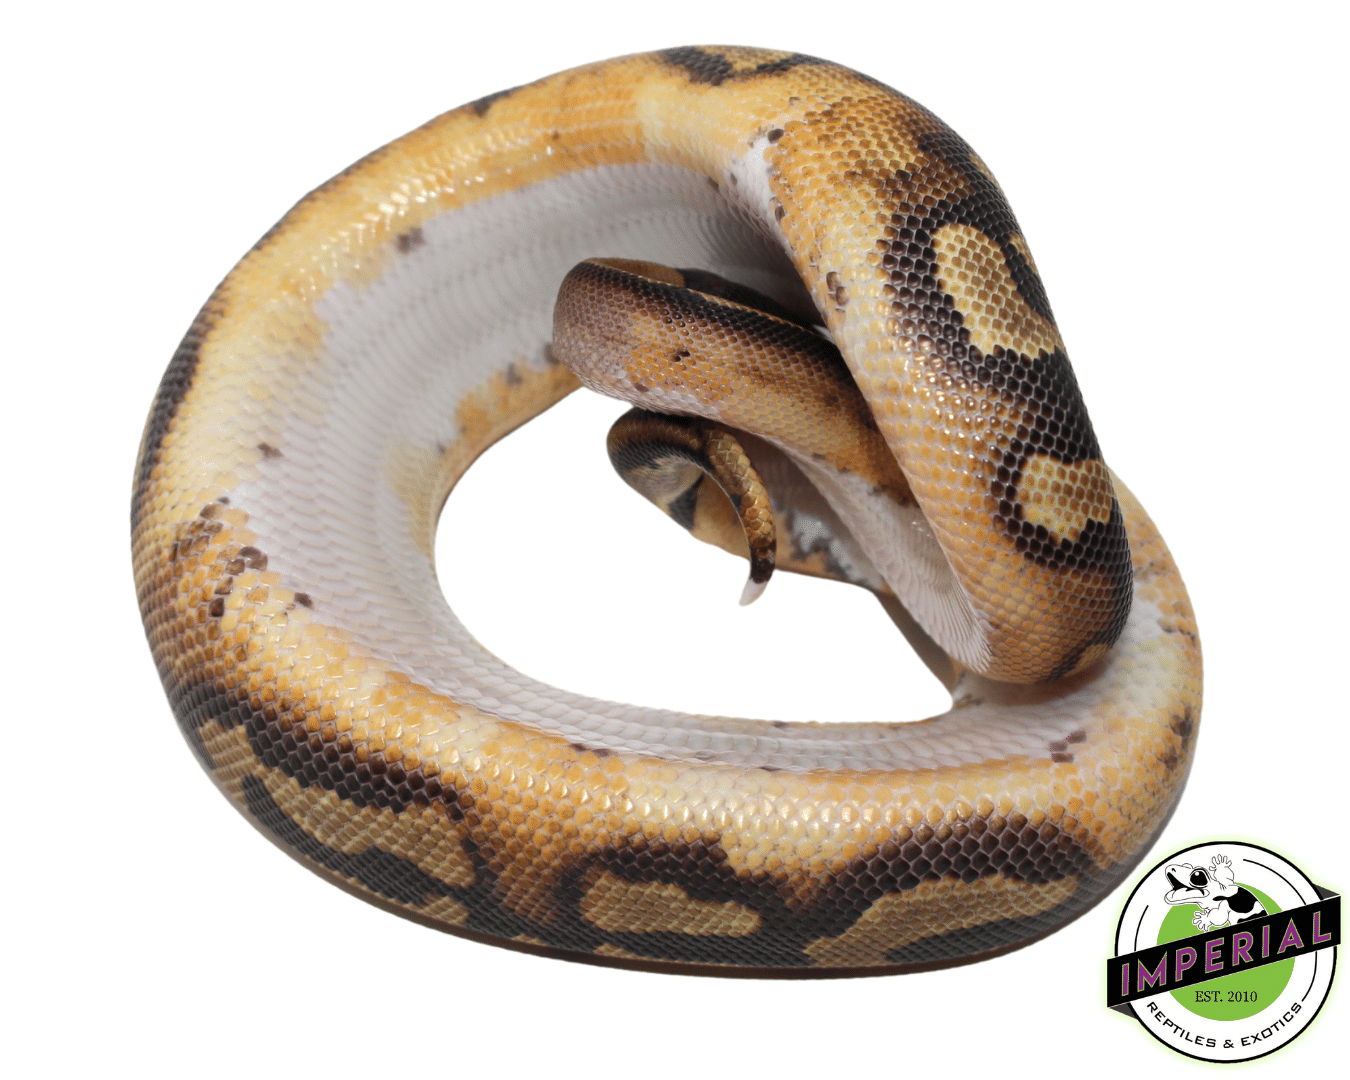 ball python for sale, buy ball pythons online at cheap prices